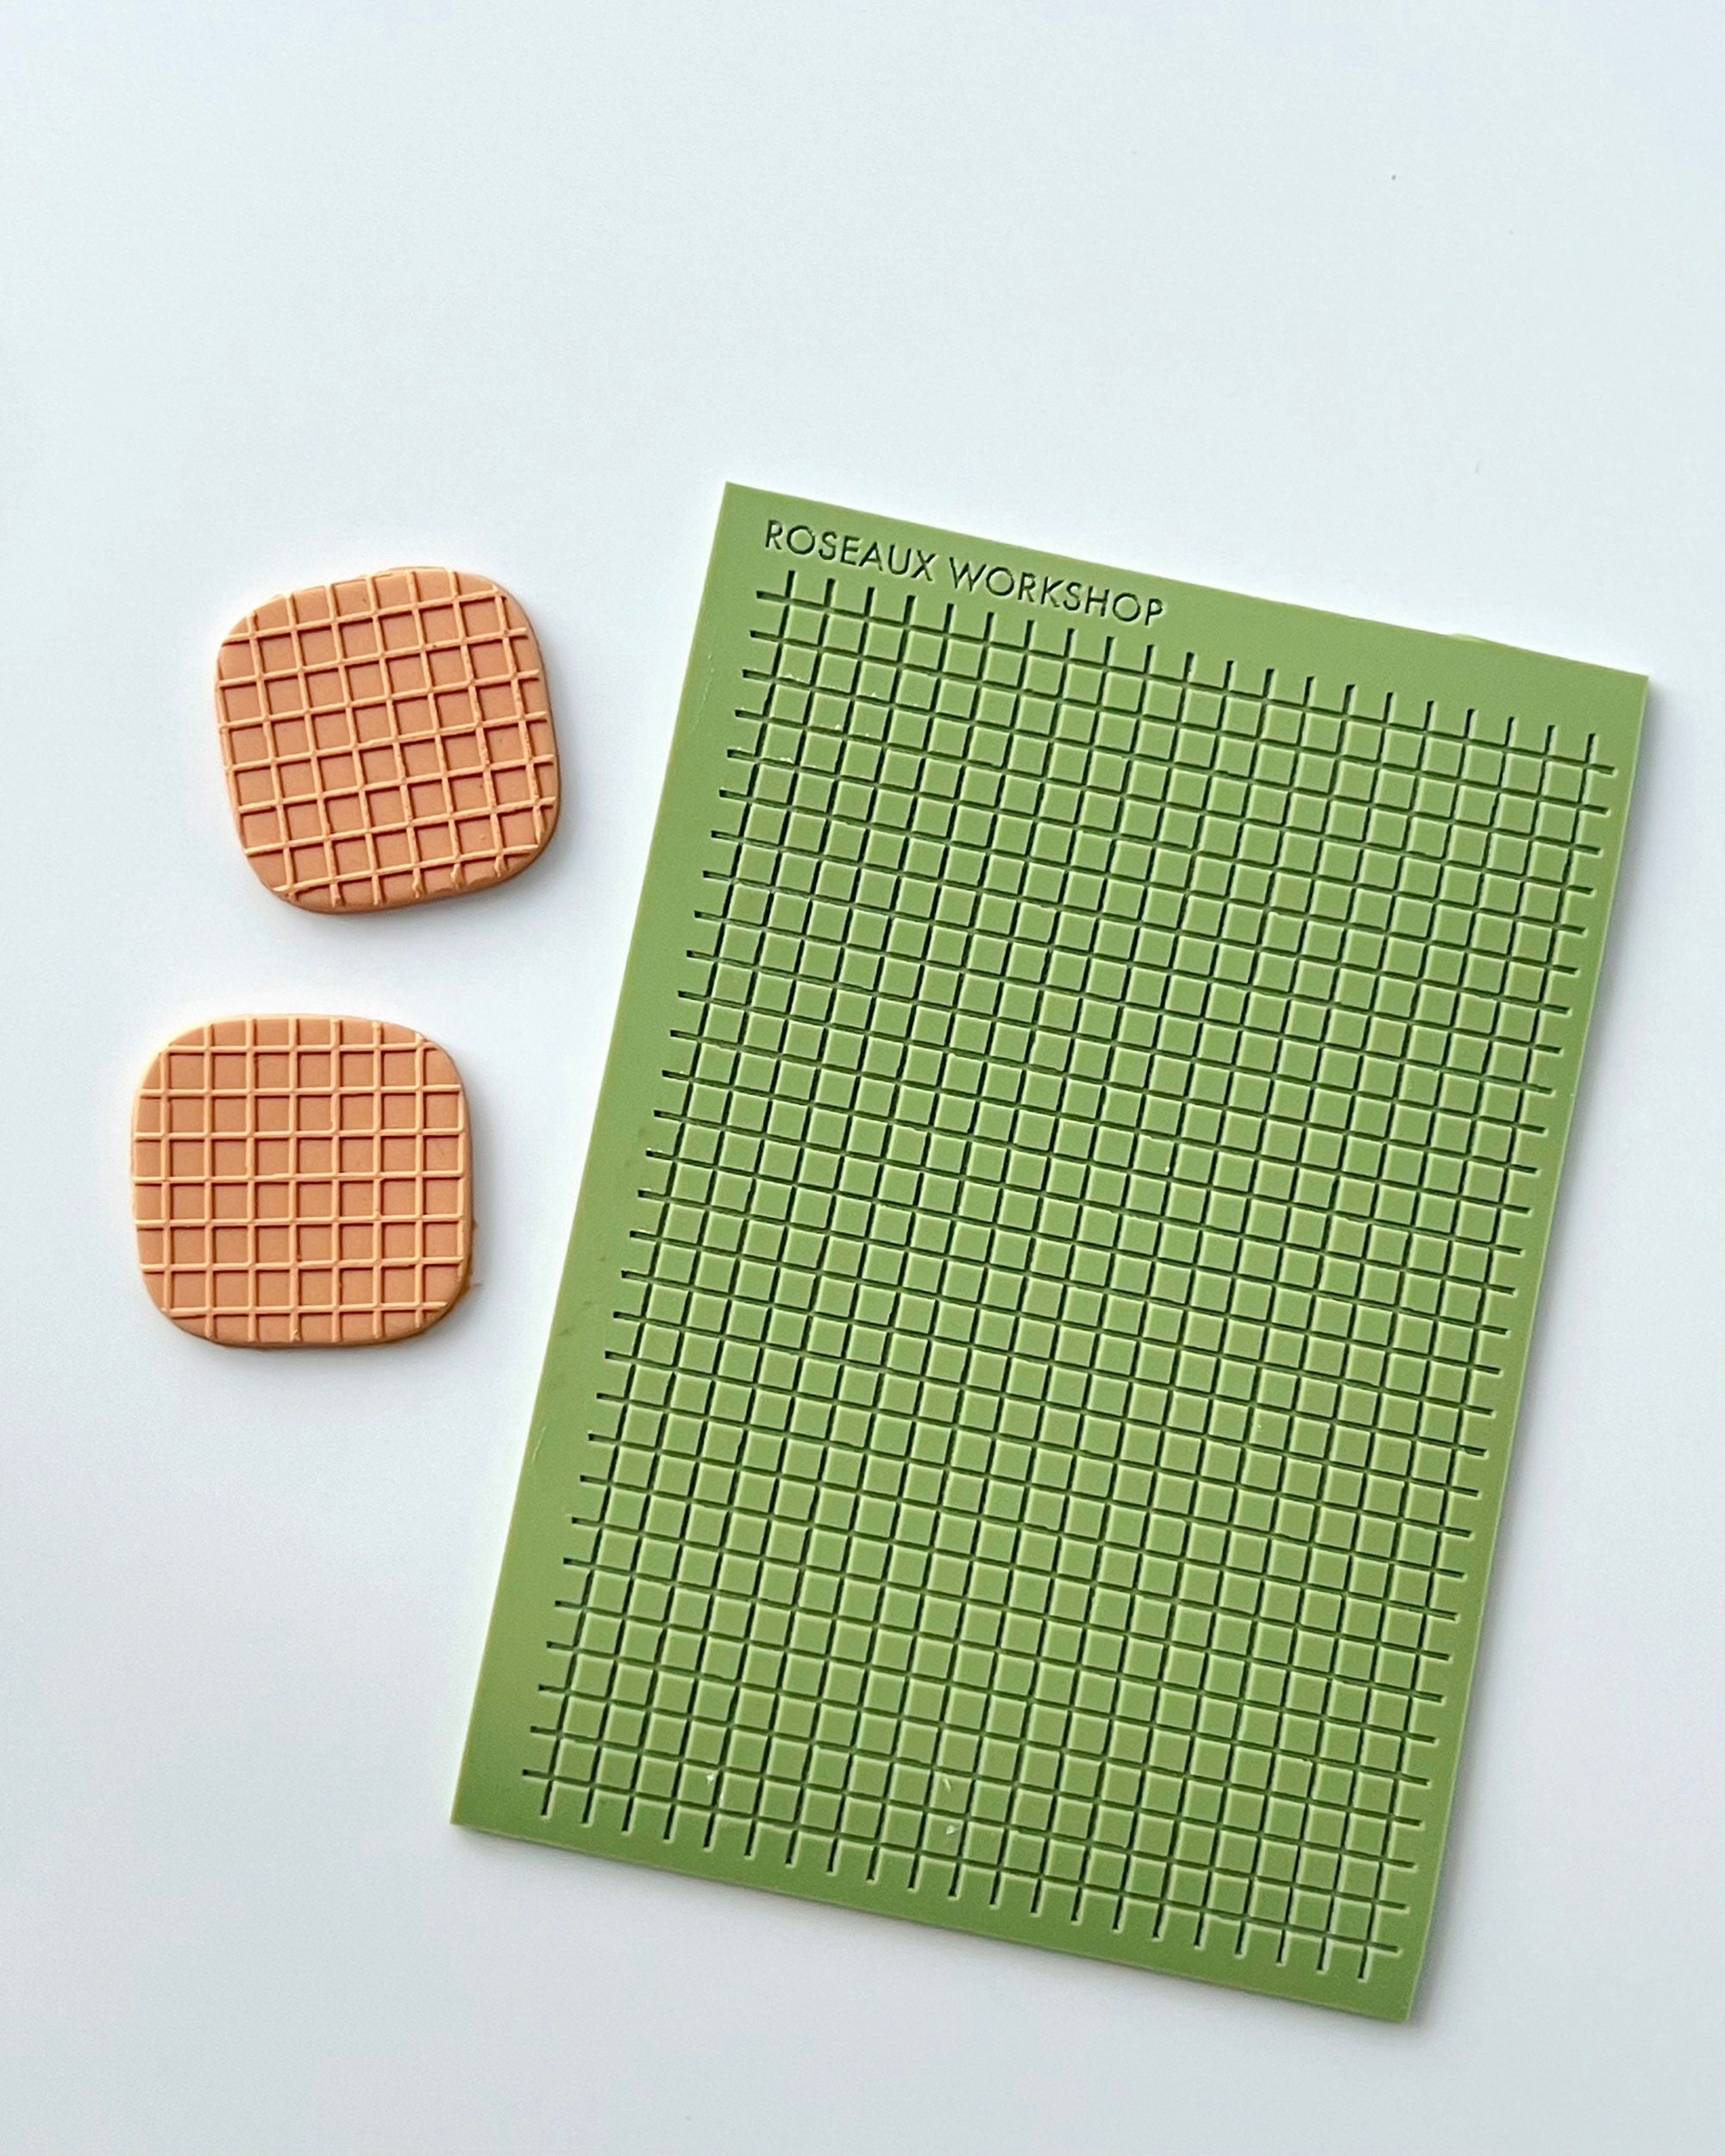 How to Make your own Texture Mats, Polymer Clay